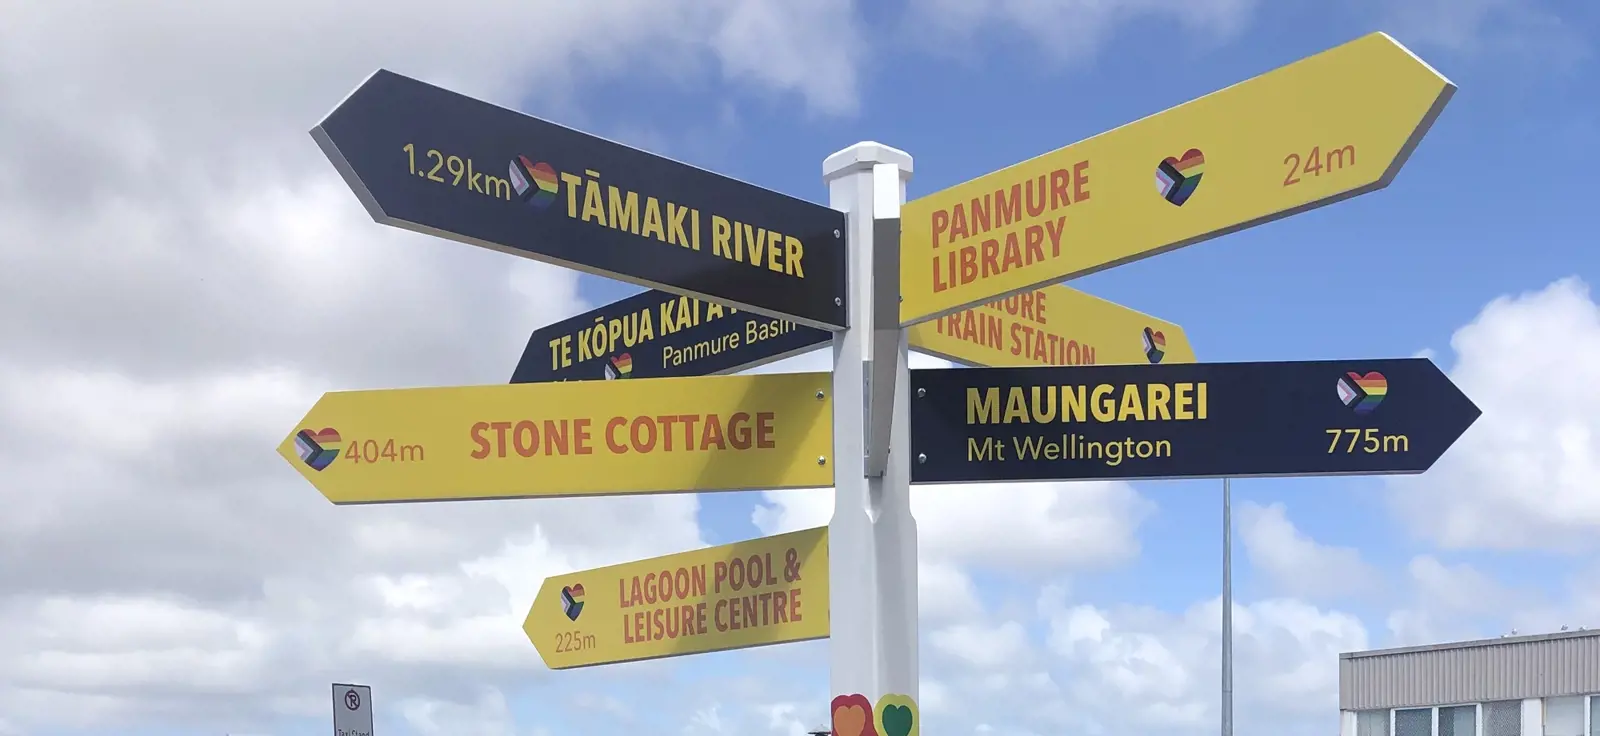 The New Way To Explore Panmure(2)